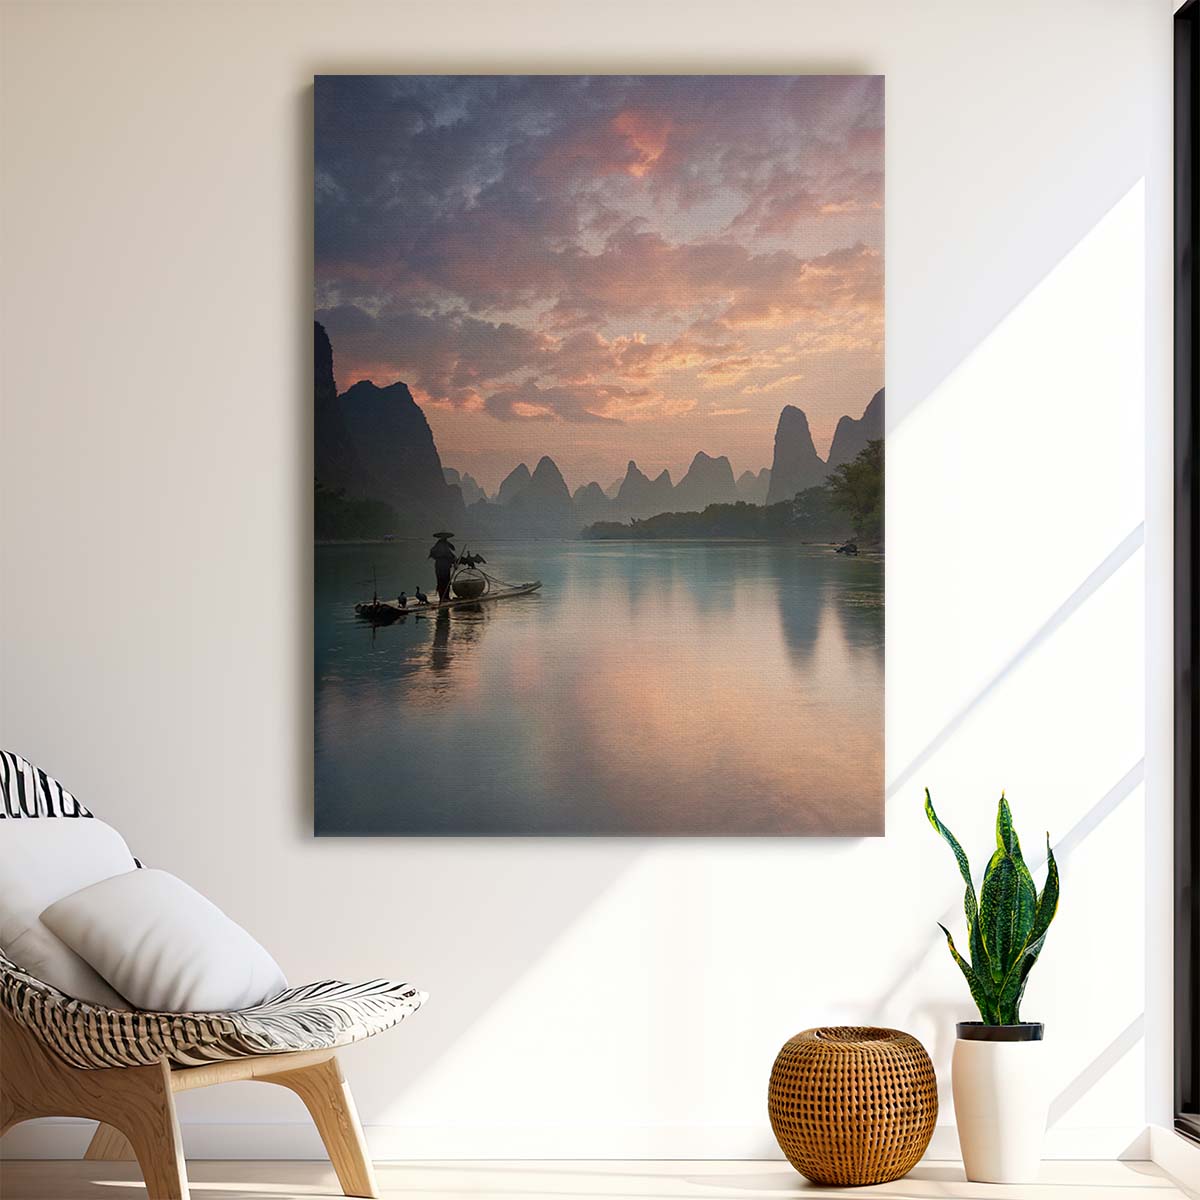 Yan Zhang's Li River Sunrise Landscape Photography, China by Luxuriance Designs, made in USA